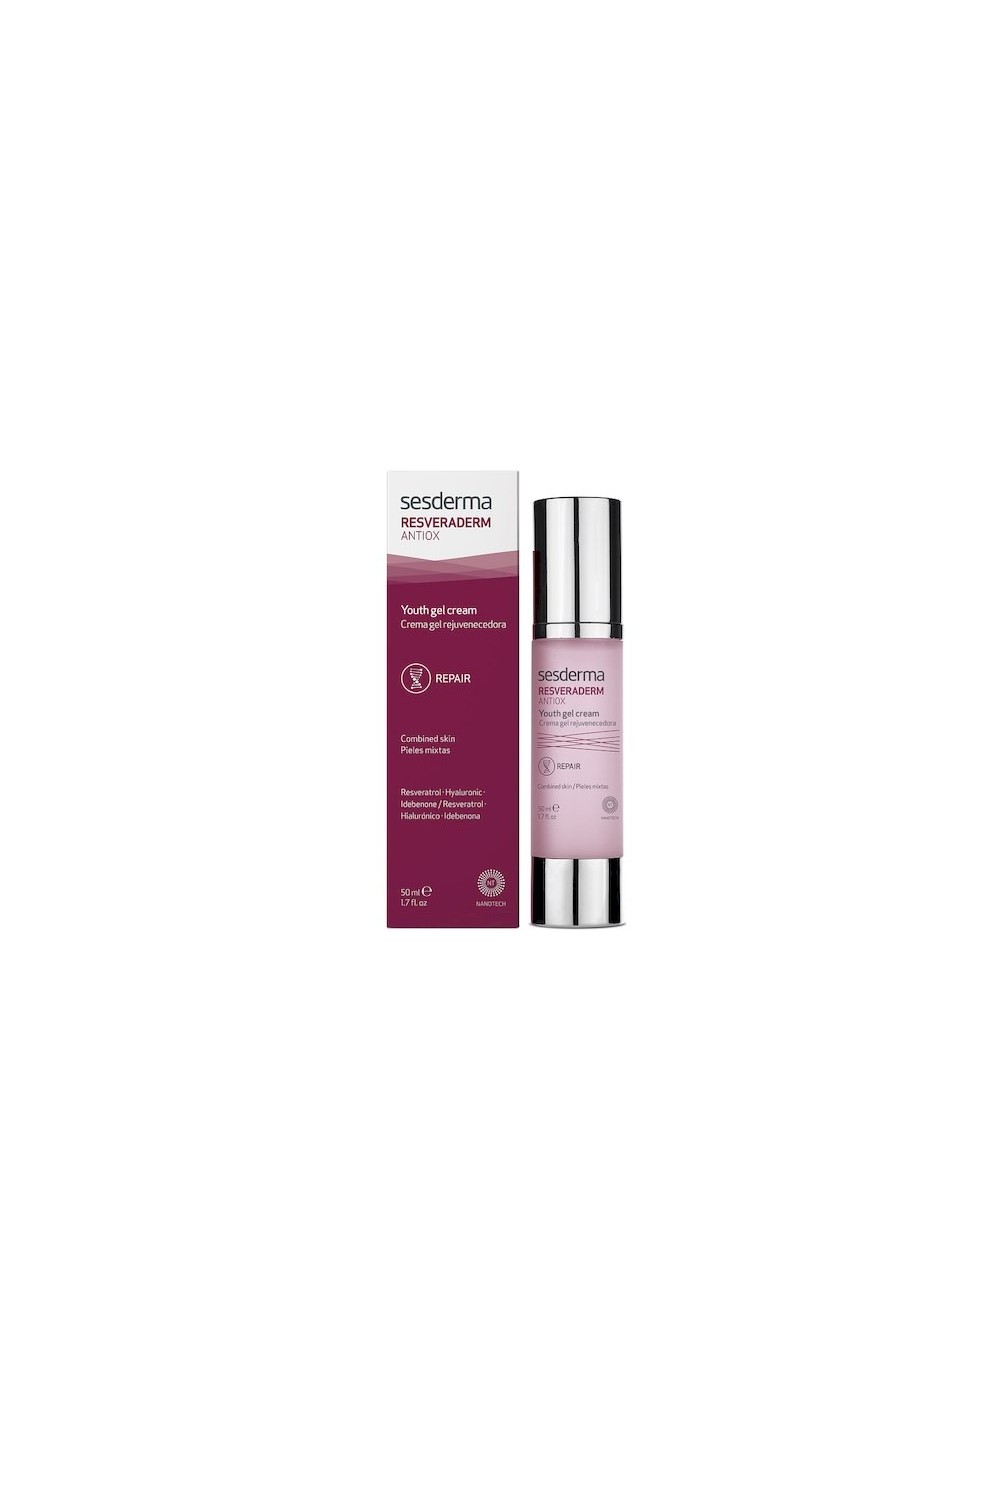 Sesderma Resveraderm Antiox Concentrated Anti Aging 50ml